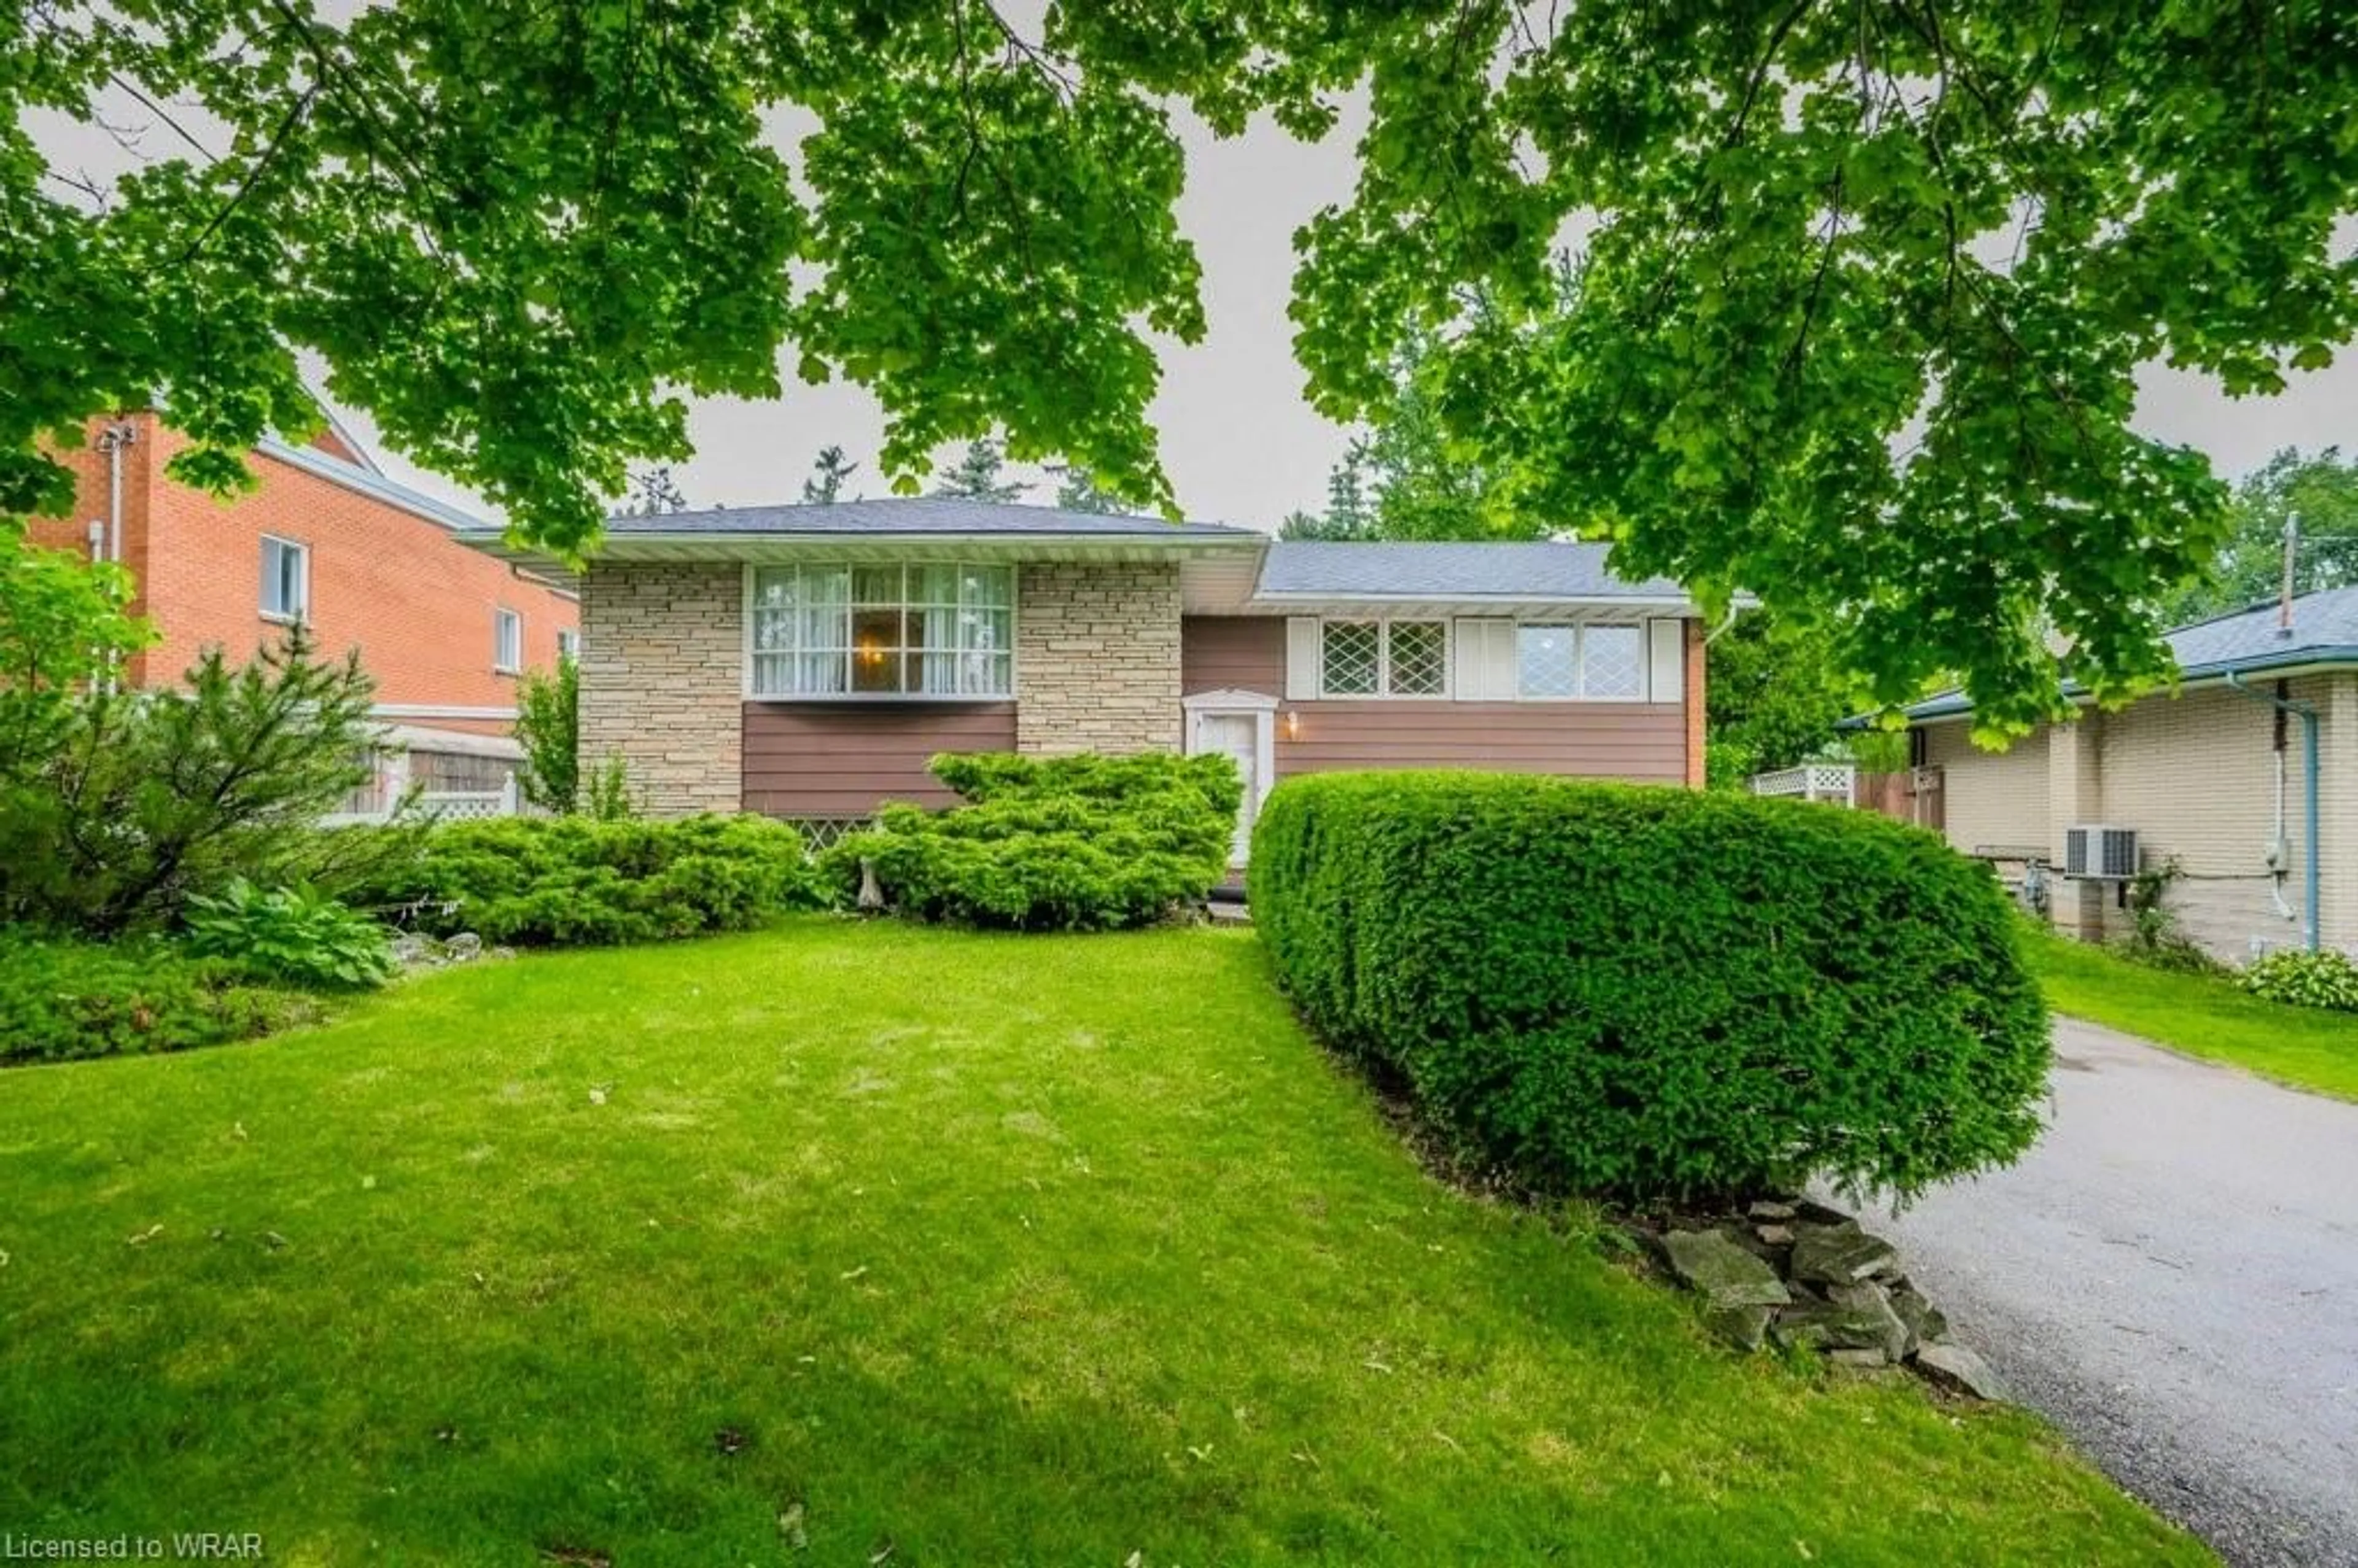 Outside view for 594 Greenbrook Dr, Kitchener Ontario N2M 4K6